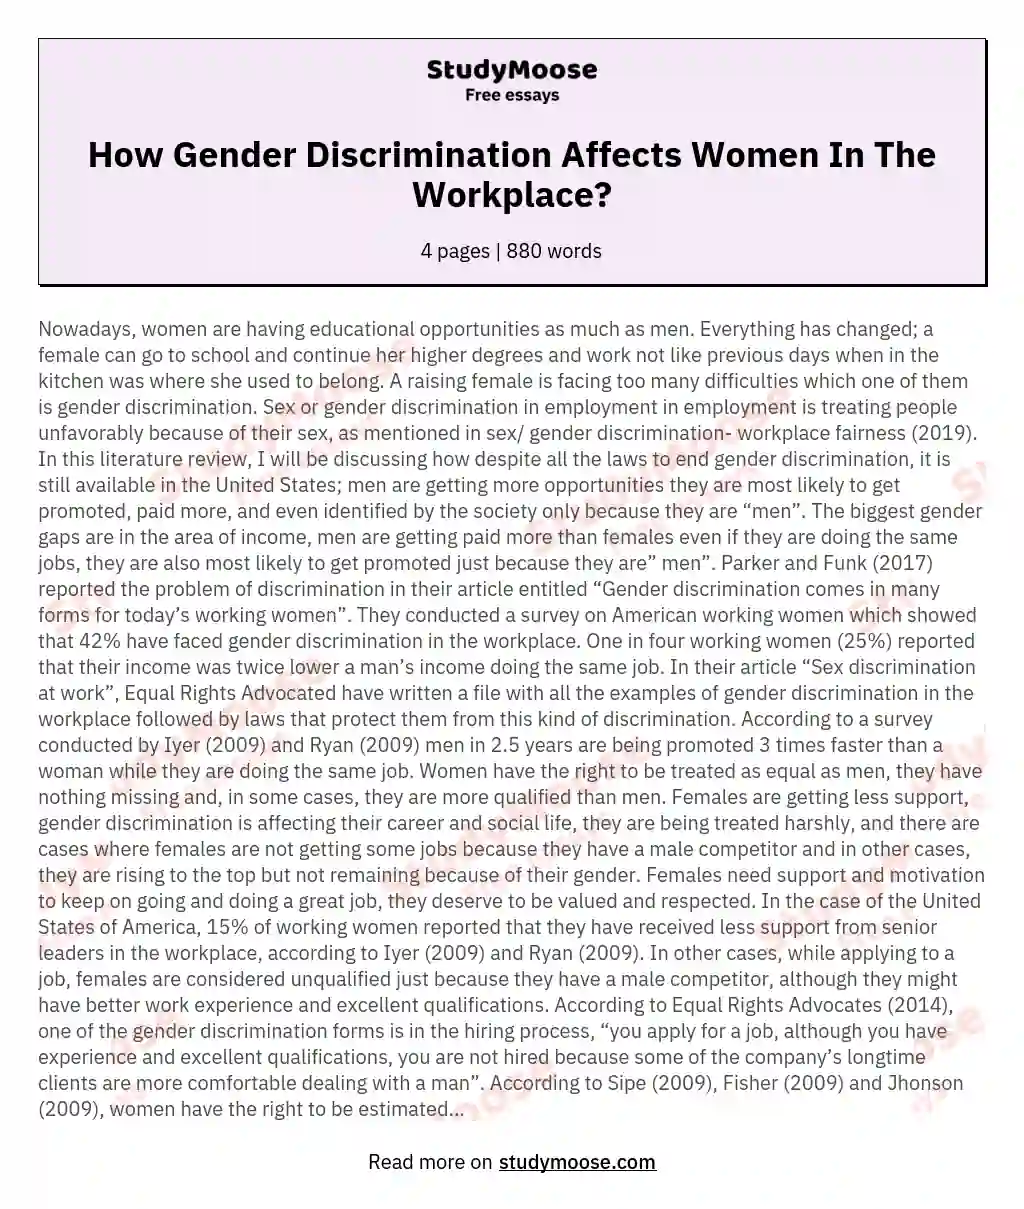 How Gender Discrimination Affects Women In The Workplace?